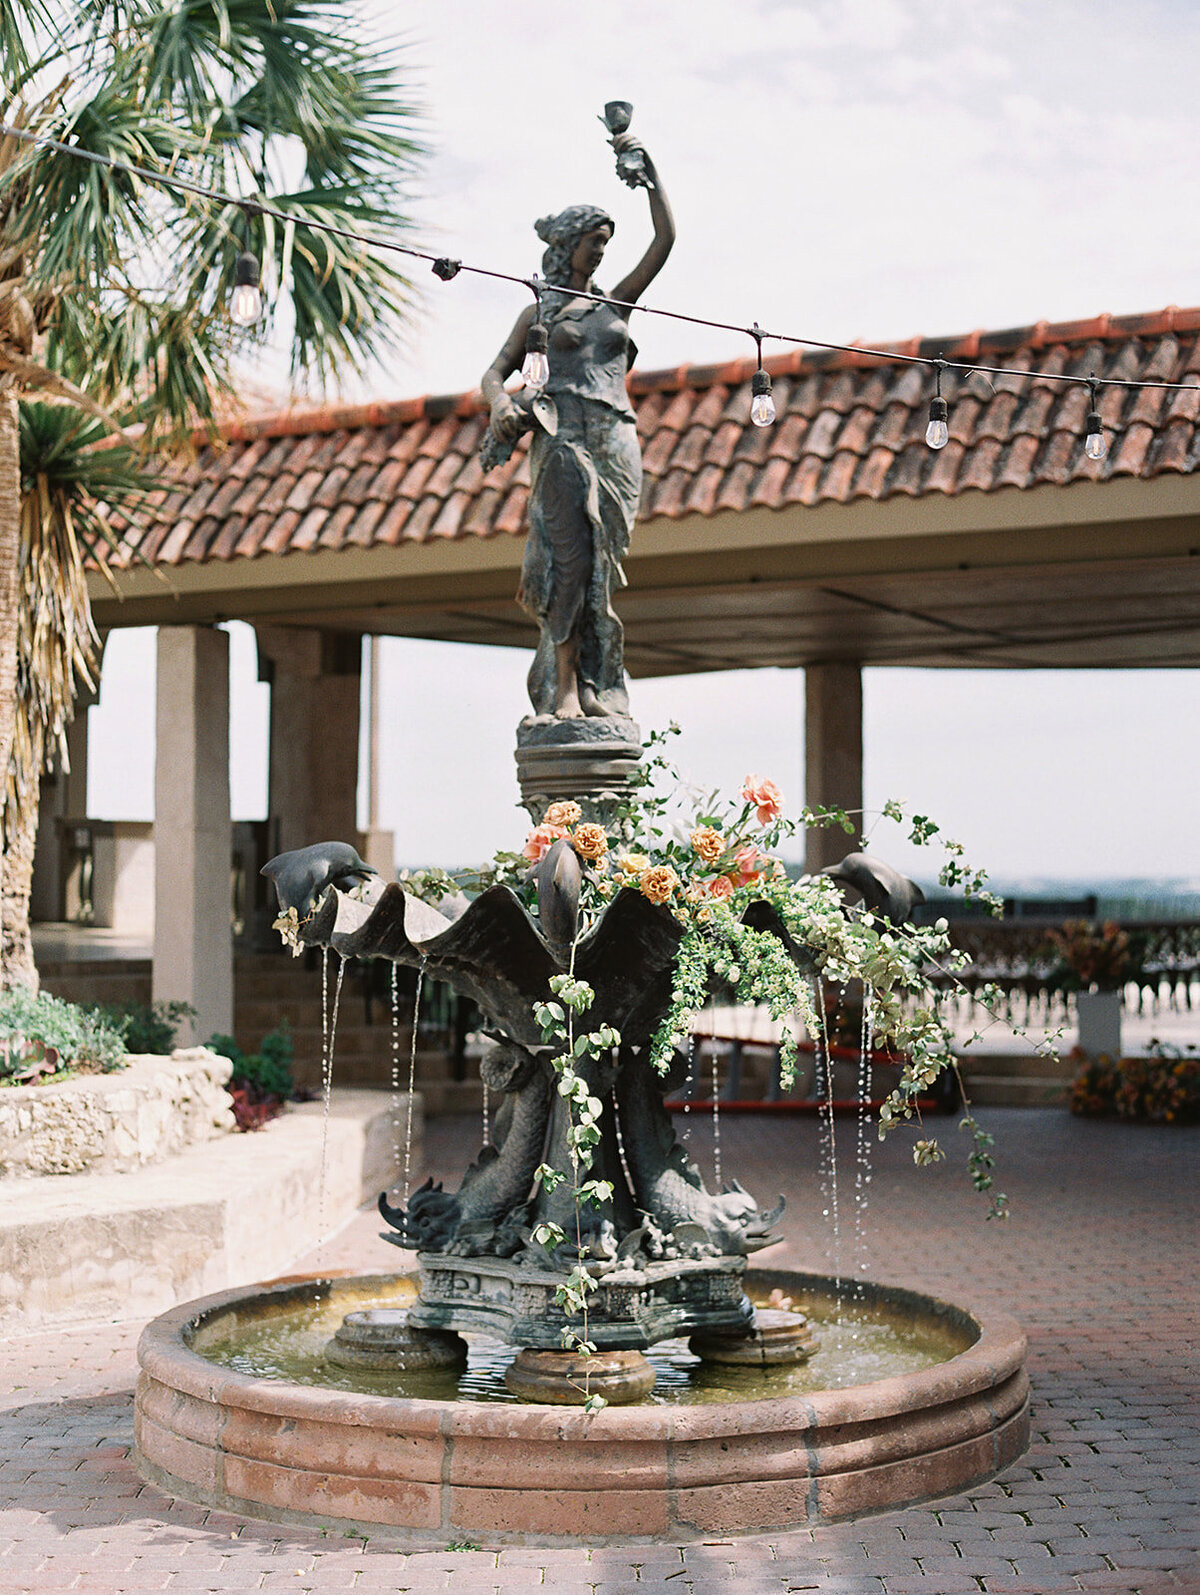 The statued fountain was decorated with flowers and fresh fruit for this couple's wedding